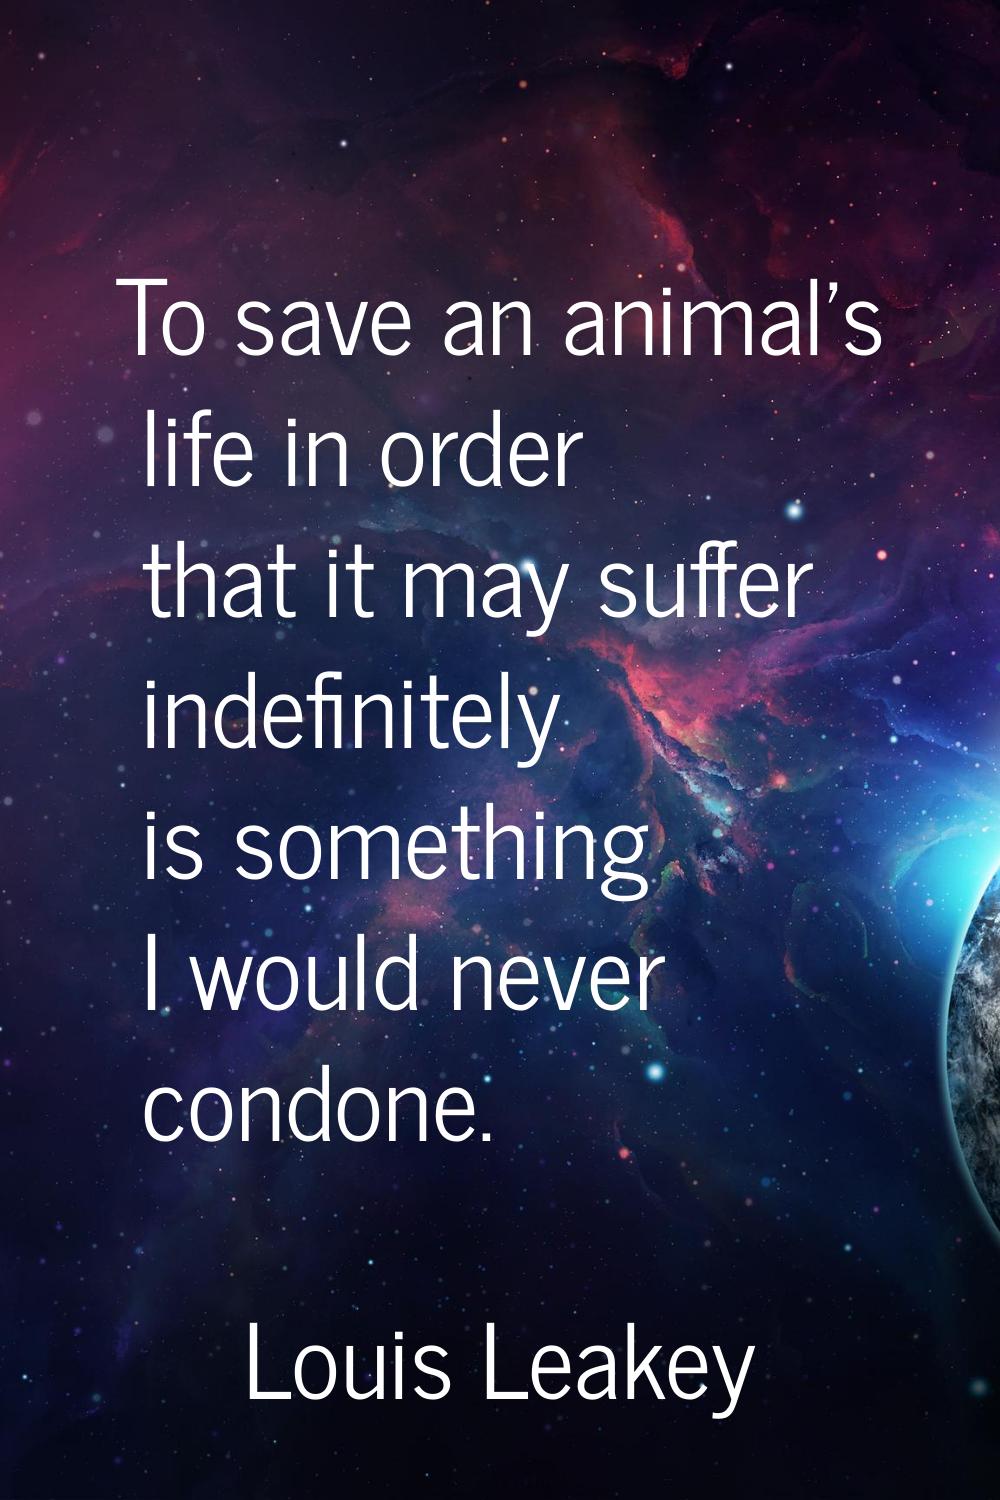 To save an animal's life in order that it may suffer indefinitely is something I would never condon